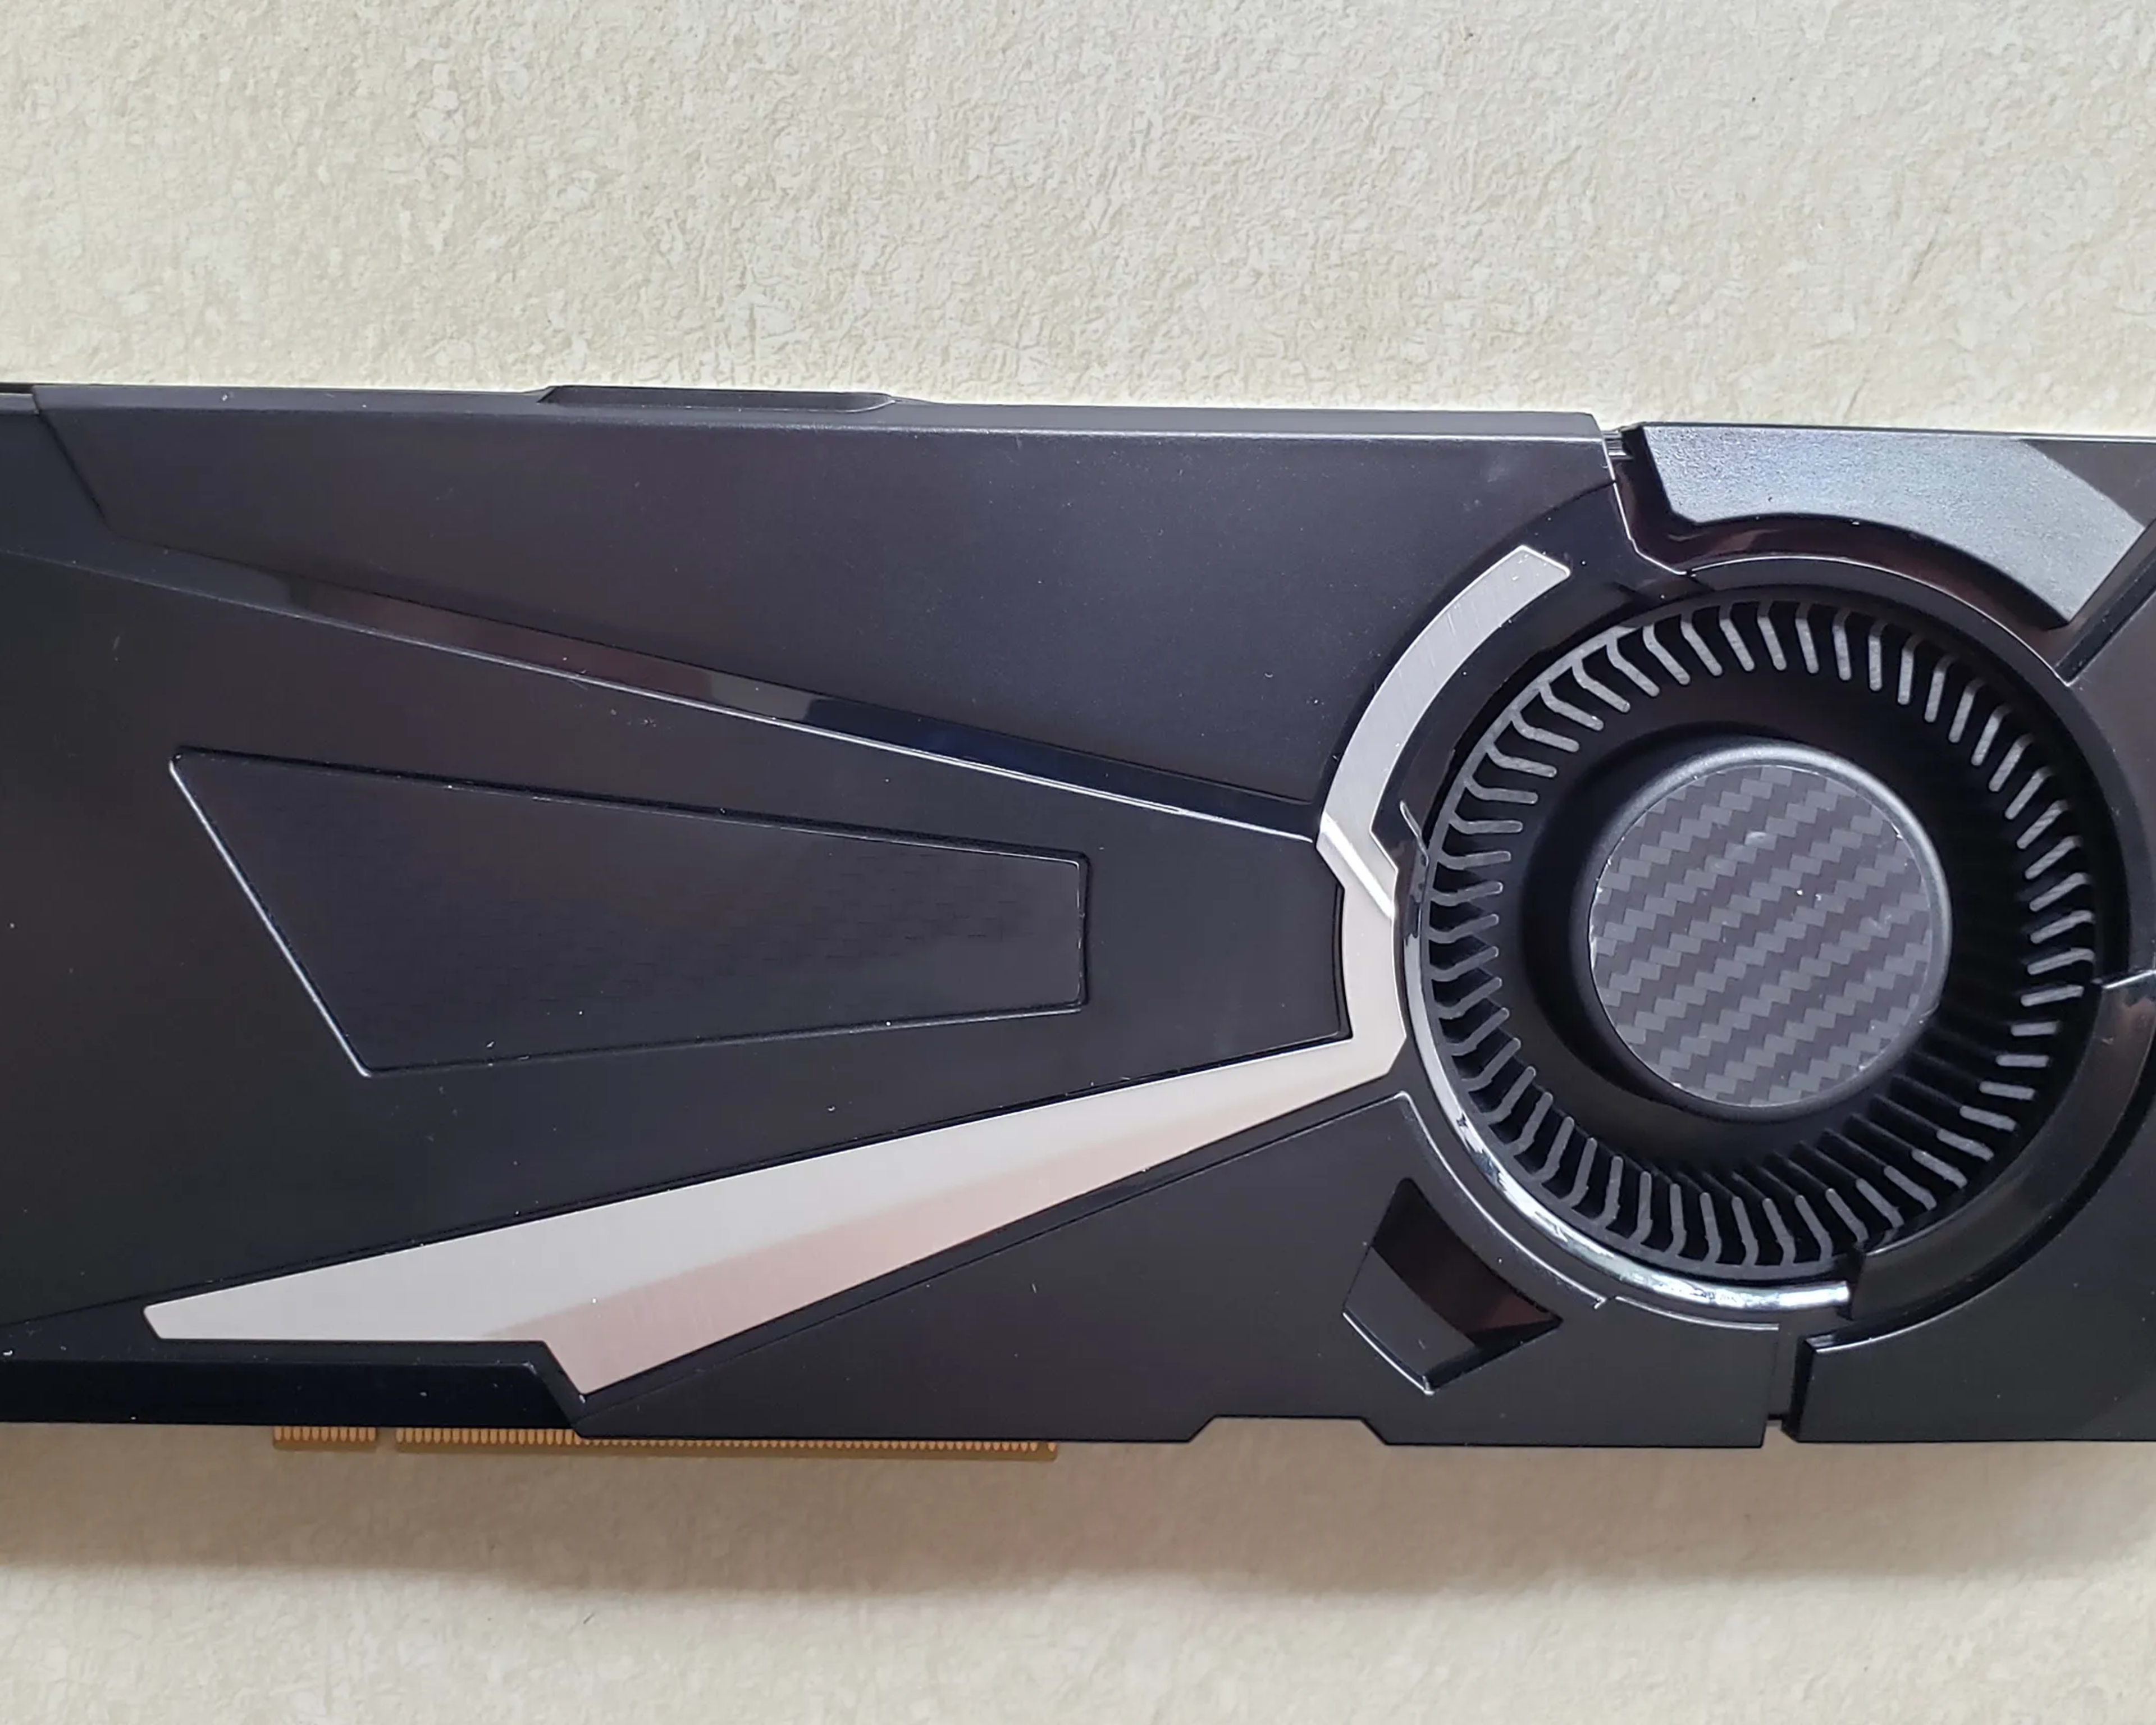 DeLL GTX 1070 graphics card with 8gb memory